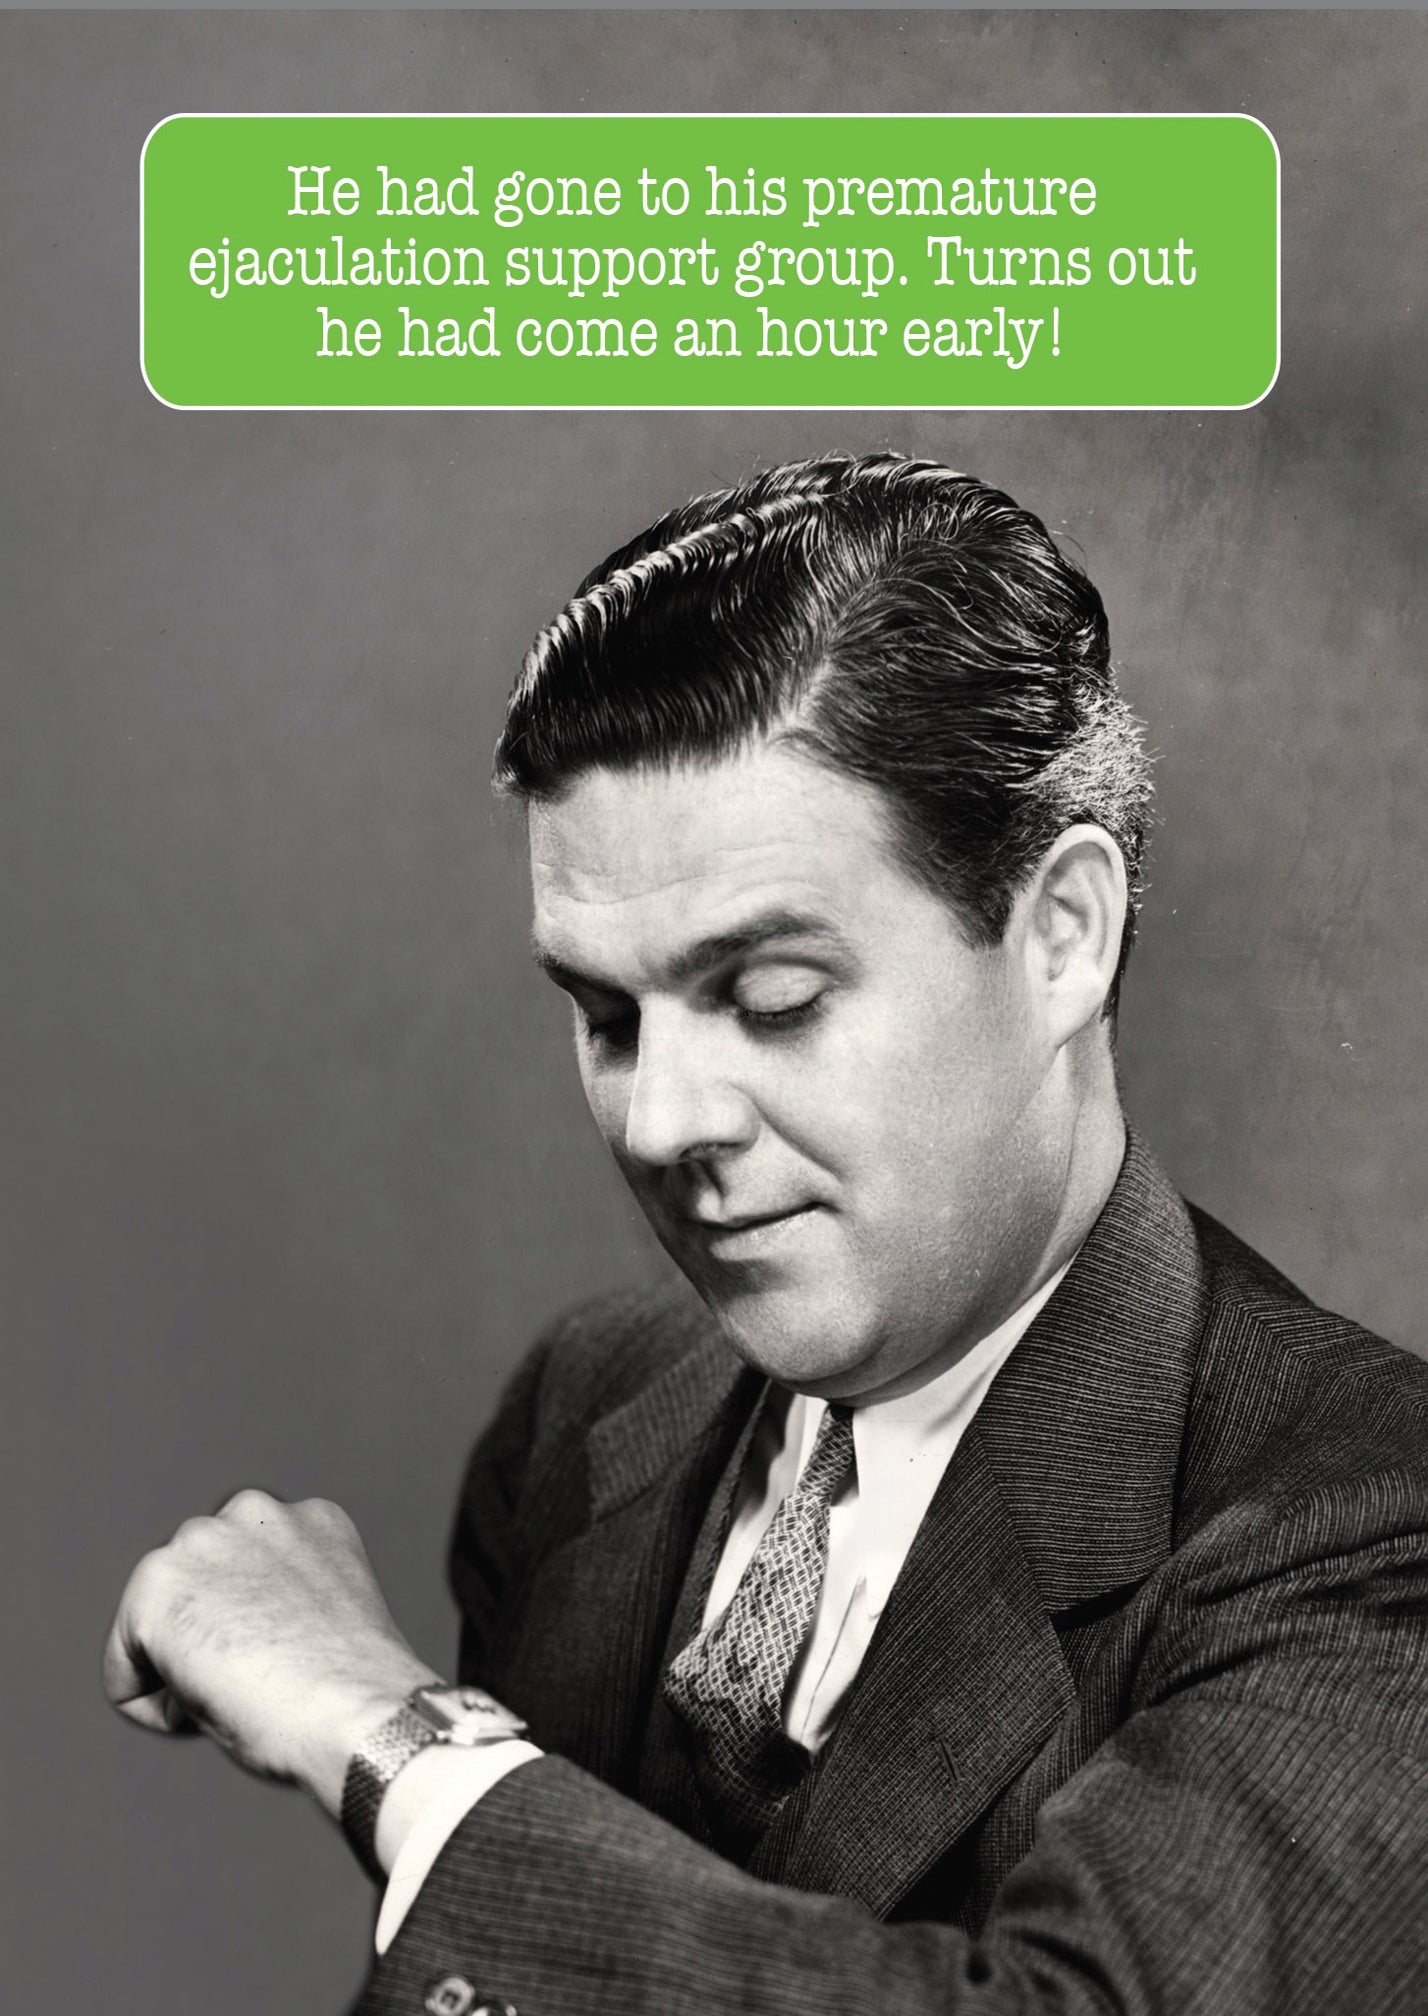 Come An Hour Early Humour Birthday Card